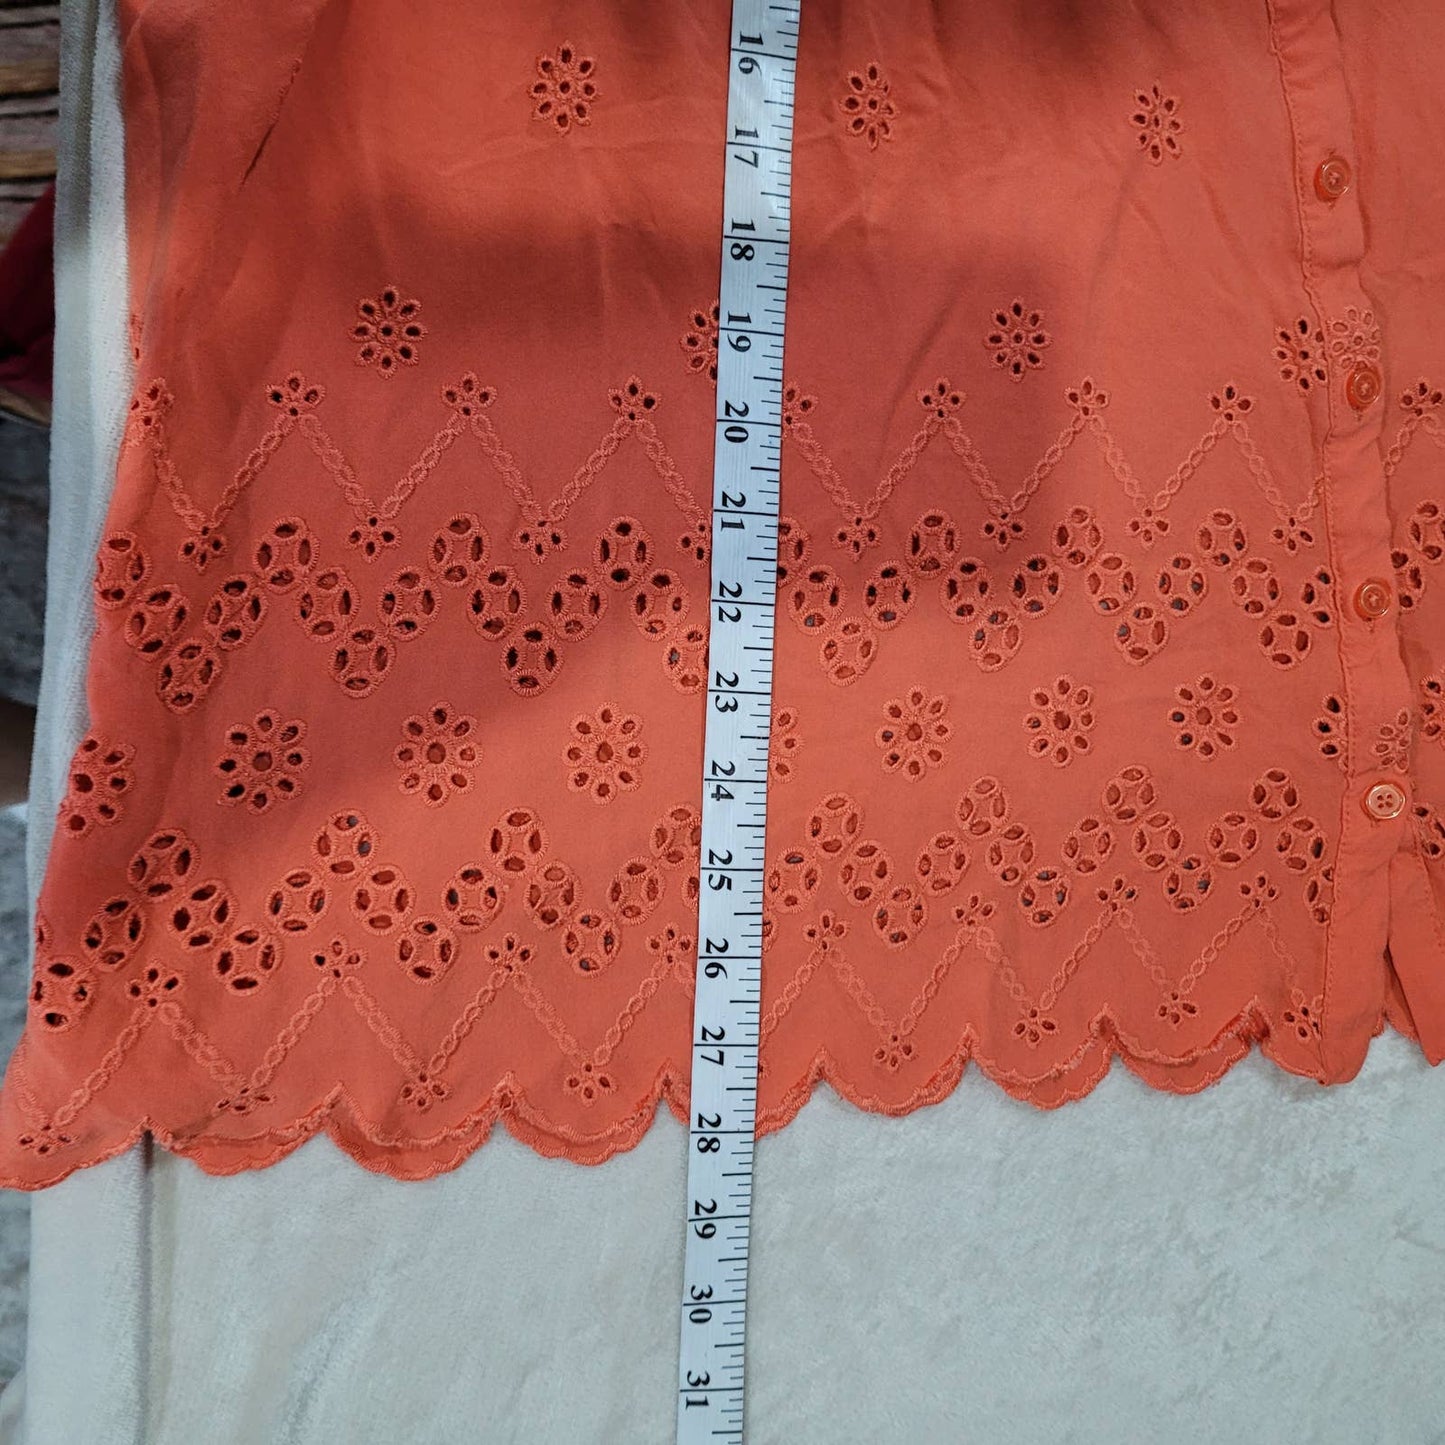 Torrid Coral Eyelet Ruffle Tie Front Tank Top - Size 4X